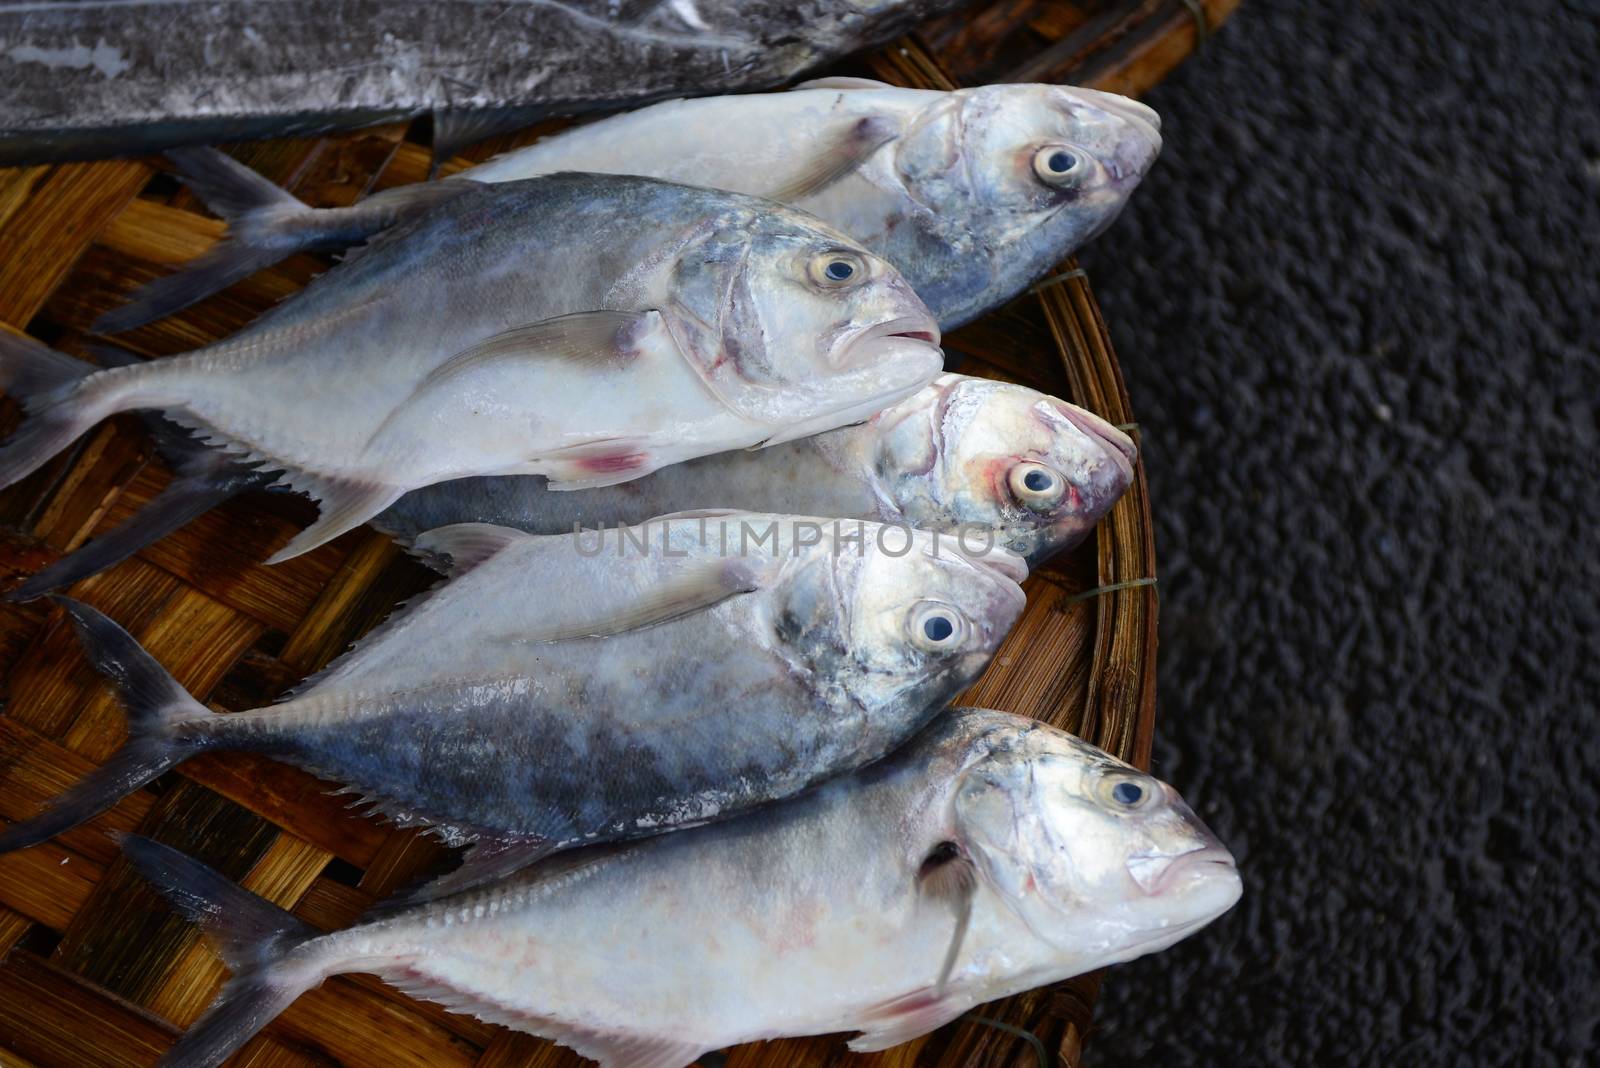 croaker fish Sell in fresh seafood market, note  select focus with shallow depth of field	

